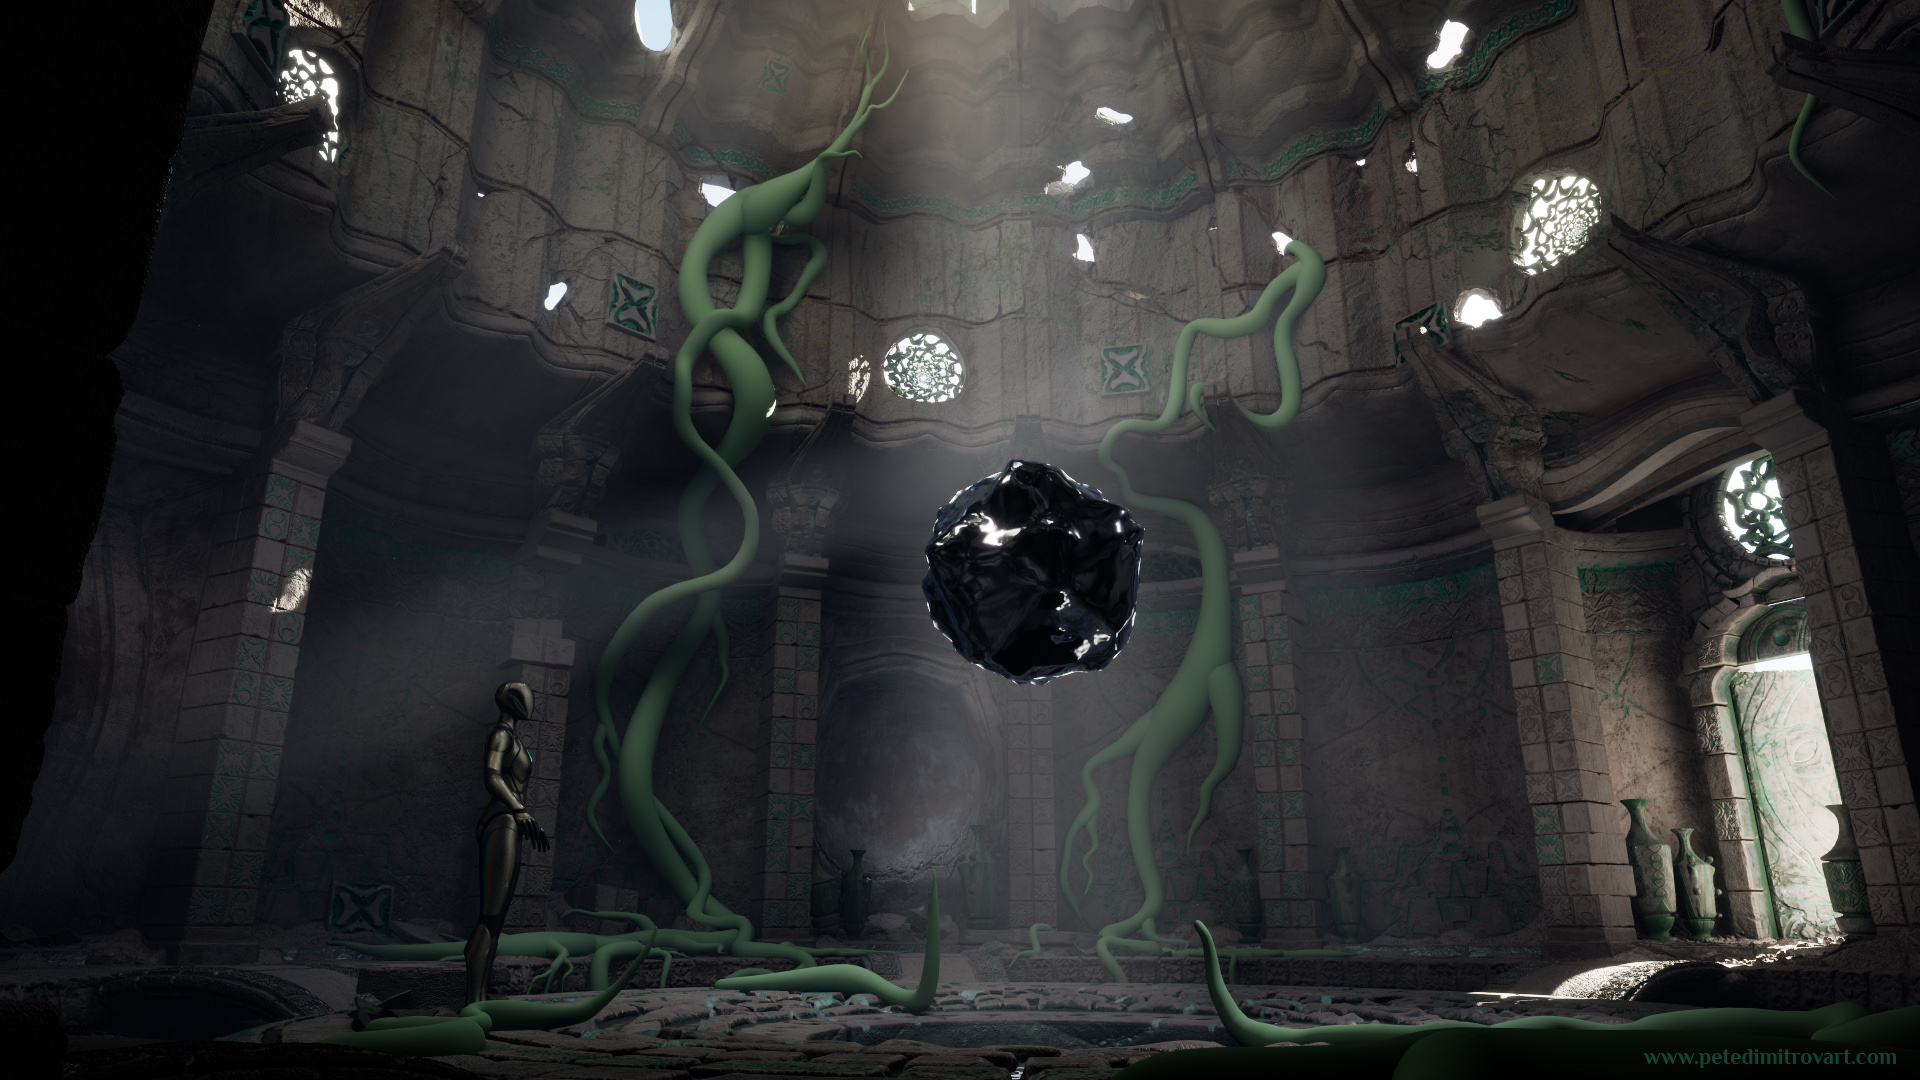 Lower ground level camera. Below the floating orb in the middle, bathed in alpha cards light, there are the roots blockouts. Those slither around on the ground and once reaching the middle of the platform start to move upwards, as if trying to touch the orb.